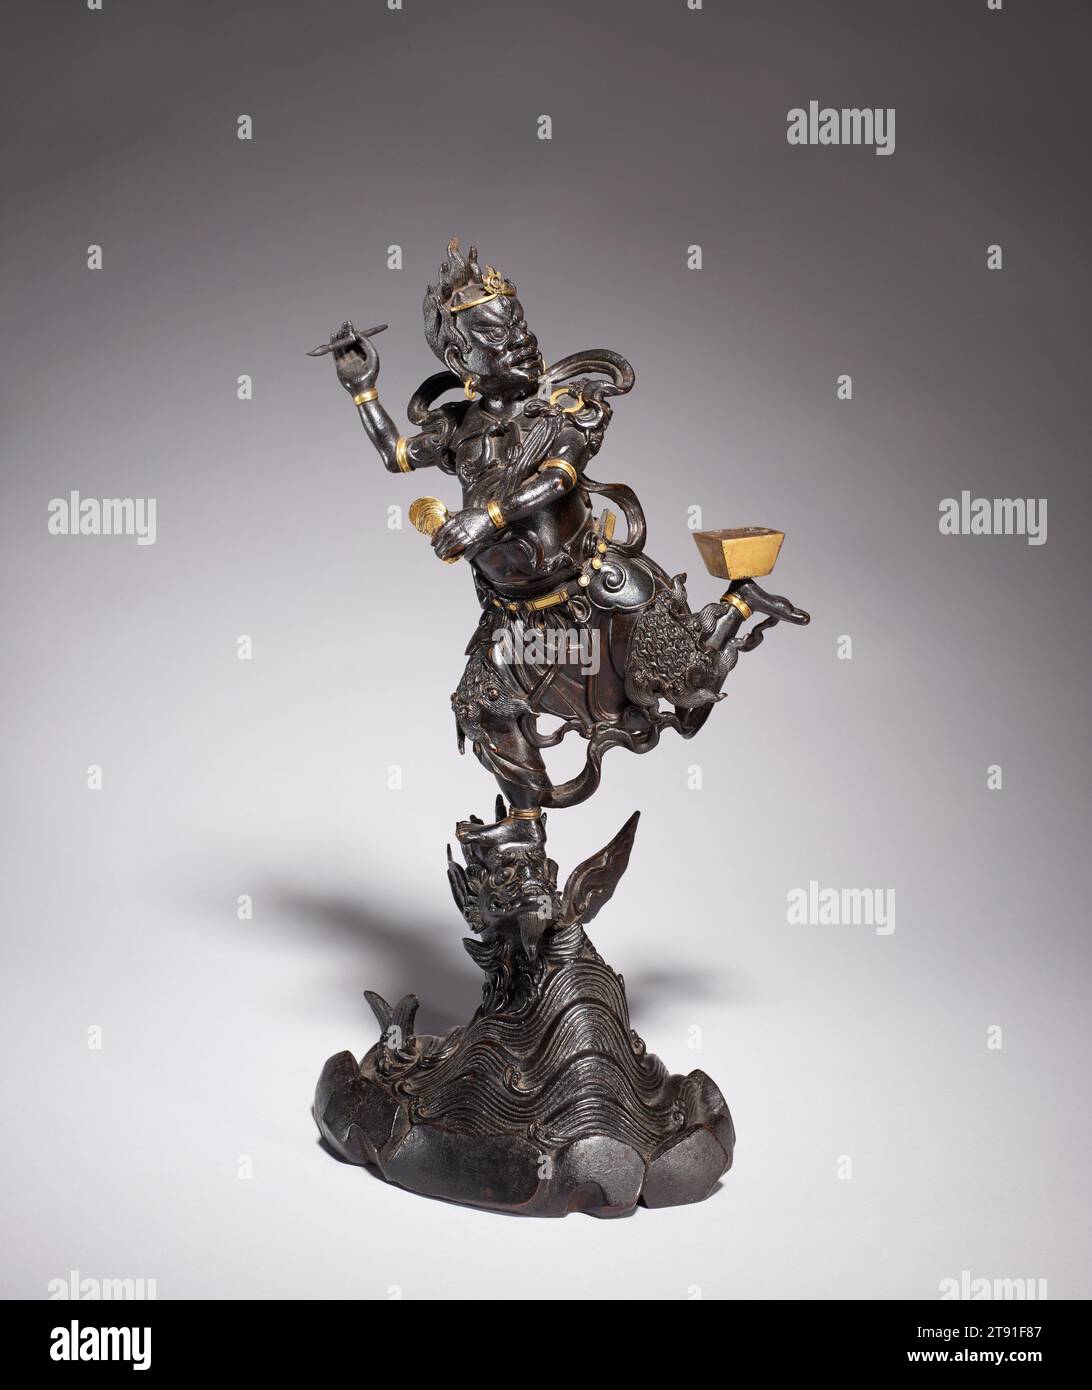 Kui Xing (God of Literature), 16th century, 25 x 7 x 5 in. (63.5 x 17.78 x 12.7 cm) (approximate), Bronze with traces of gilding, China, 16th century, Originating as a Daoist deity associated with the constellation Ursa Major, Kui Xing (also called Wen Chang and Wen Di) is worshipped in the third and eighth months as the God of Literature and patron saint of scholars. The surly-looking divinity is represented holding a brush in his right hand while standing on the head of a large fish becoming a dragon. The transformation of a carp into a dragon was a synonym for the literary success Stock Photo